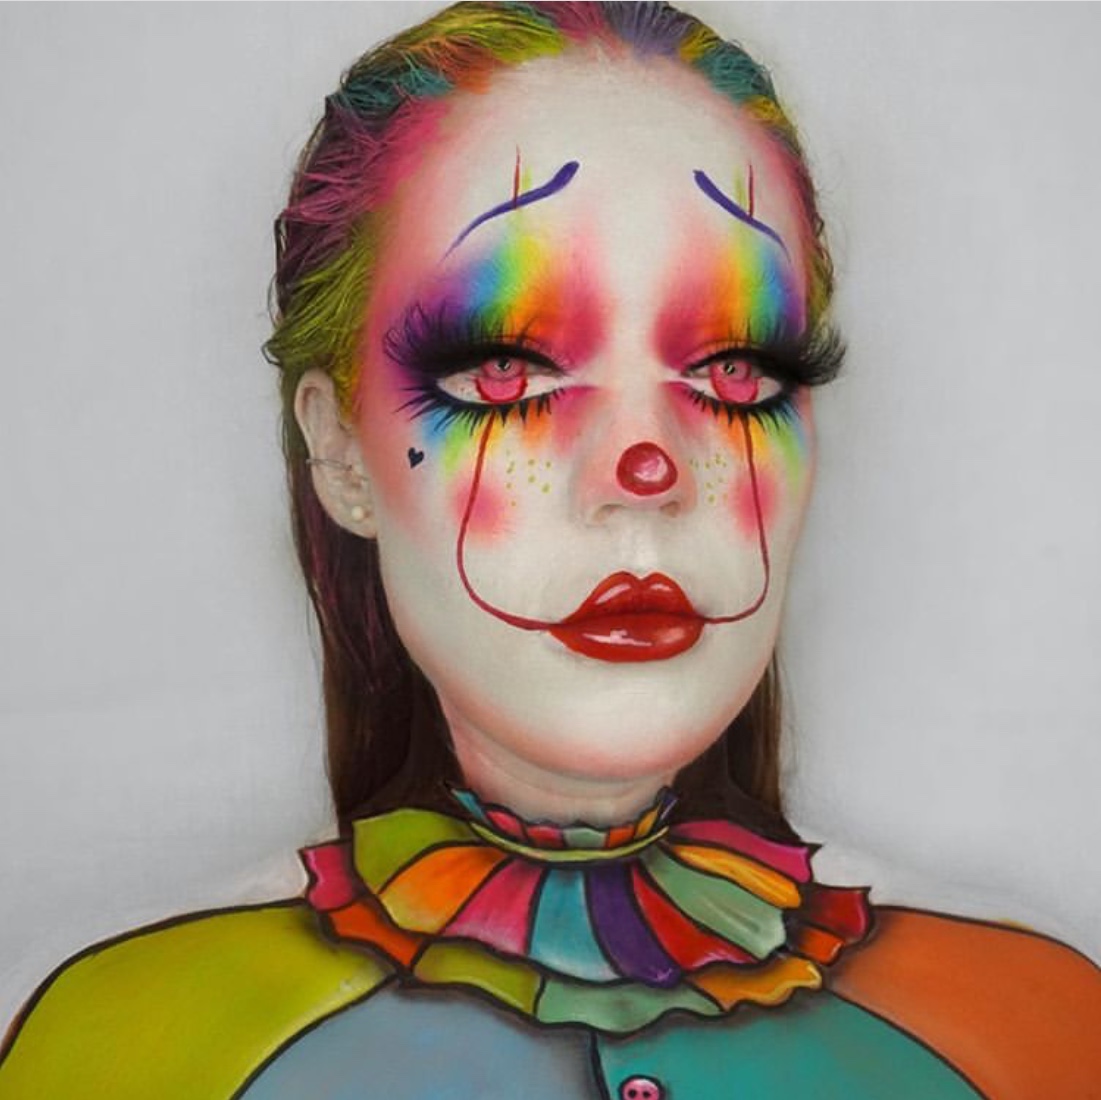 Scary Clown Makeup Looks For Halloween 2020 - The Glossychic